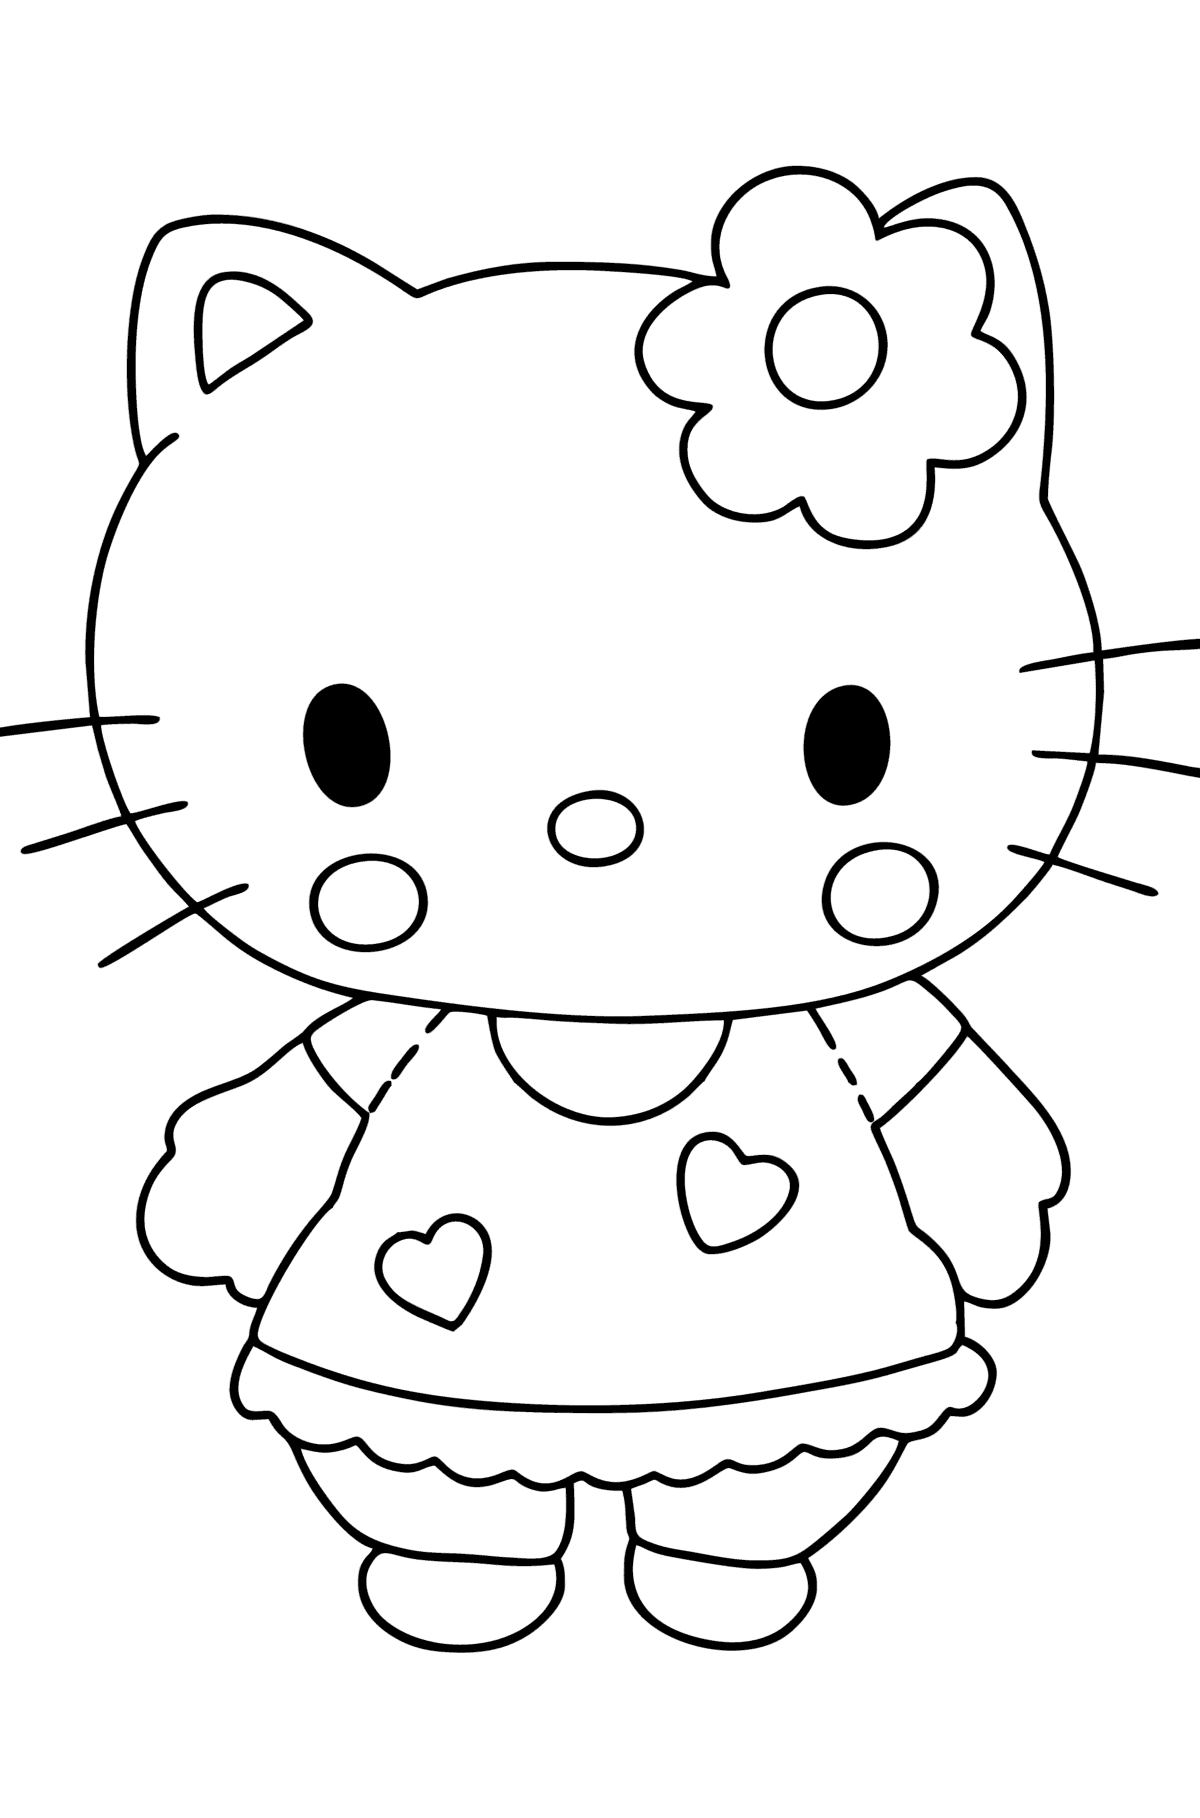 Hello Kitty coloring page - Coloring Pages for Kids